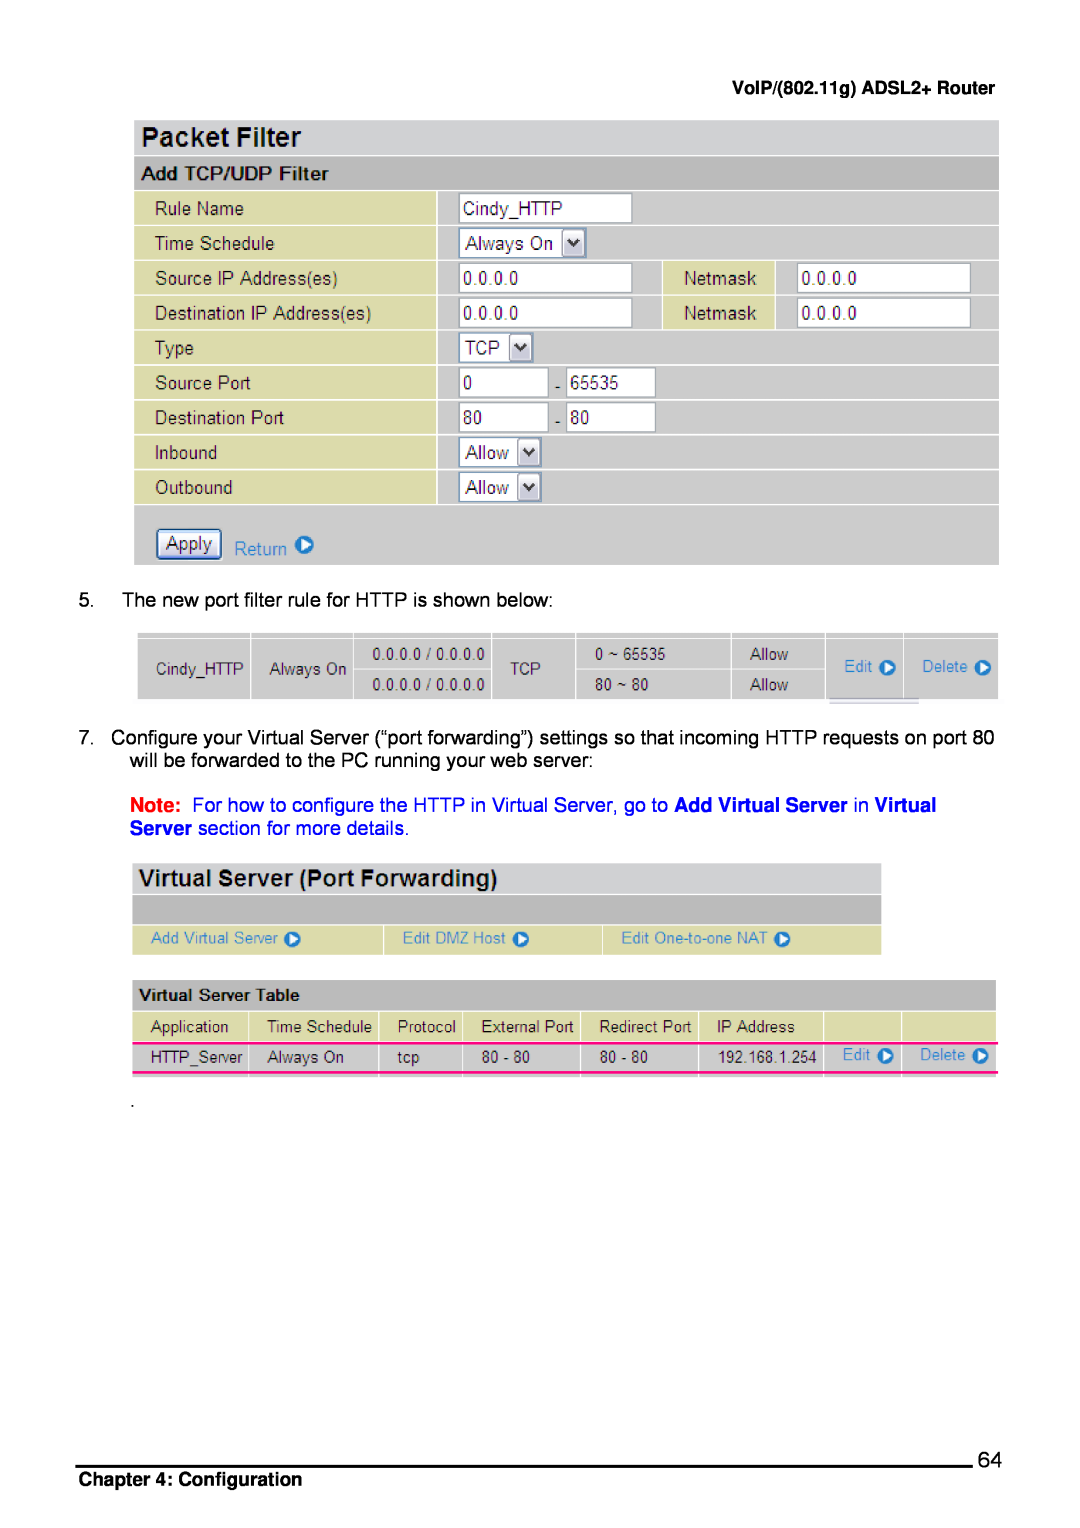 Billion Electric Company 7402VL user manual The new port filter rule for HTTP is shown below, VoIP/802.11g ADSL2+ Router 